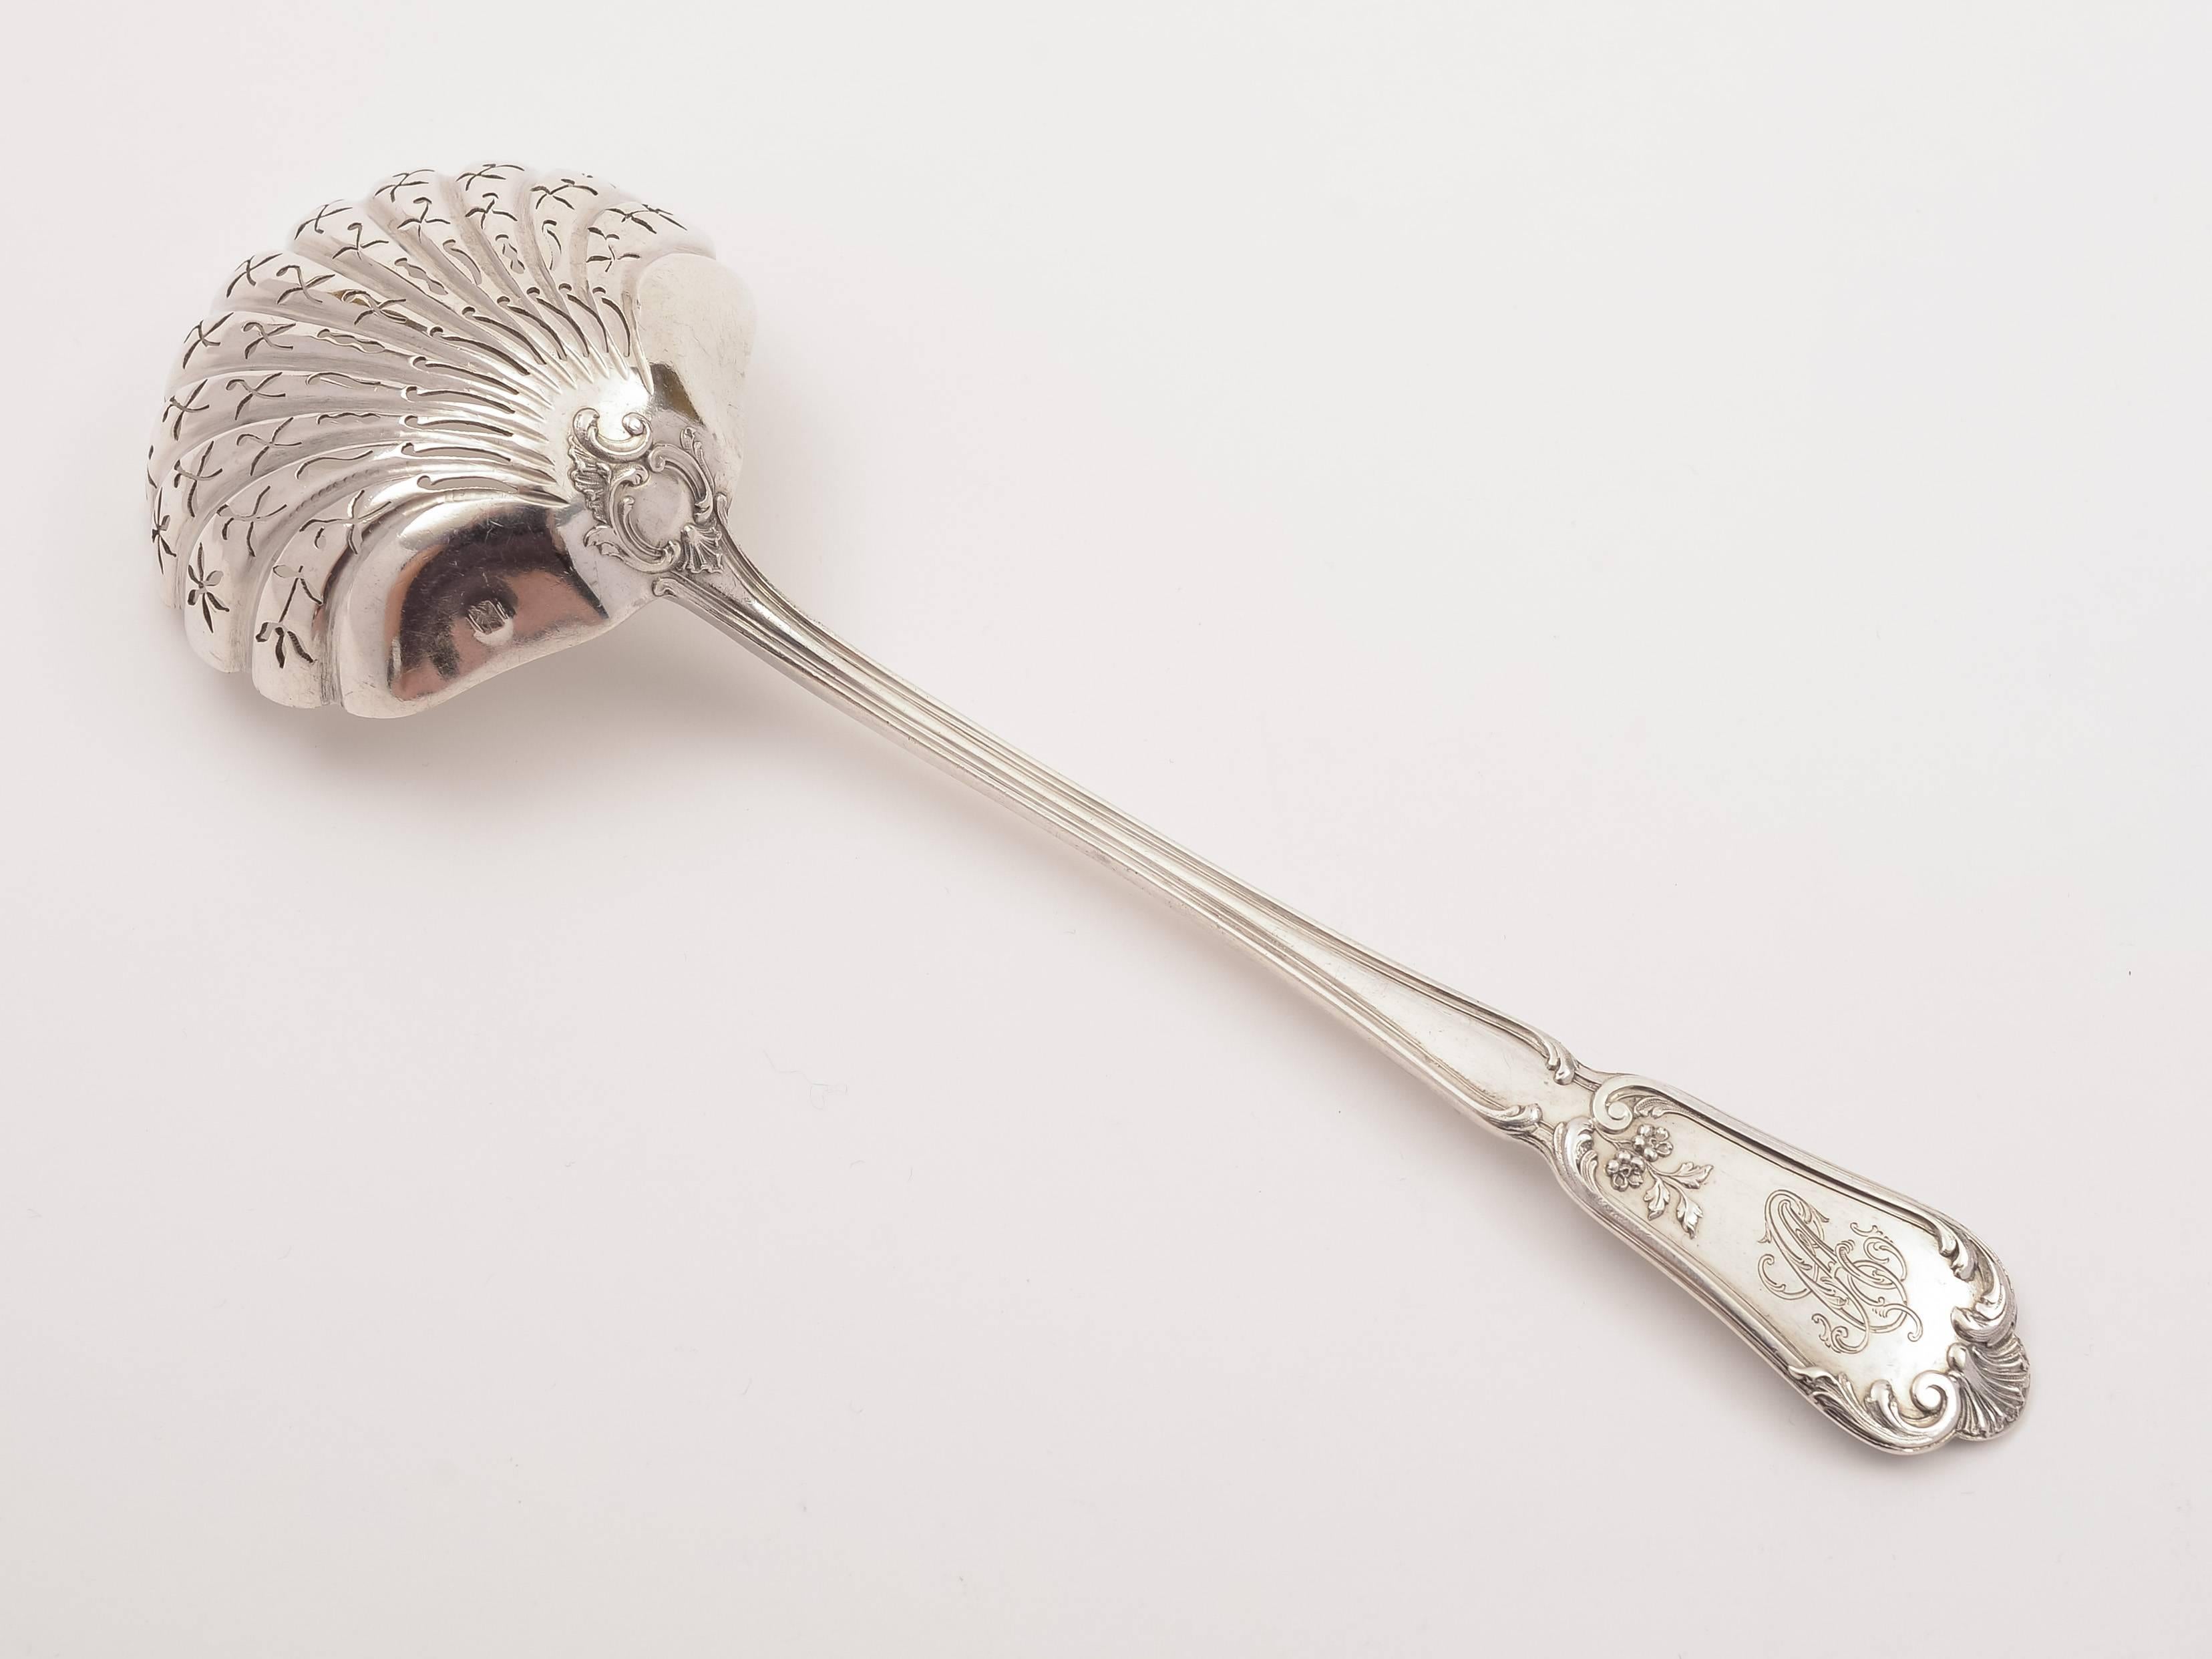 A lovely French silver sifter spoon with pierced shell-shaped bowl and embossed decoration to end. Has the French Minerva silver mark, circa 1900.

 

Measurements:
Length: 8